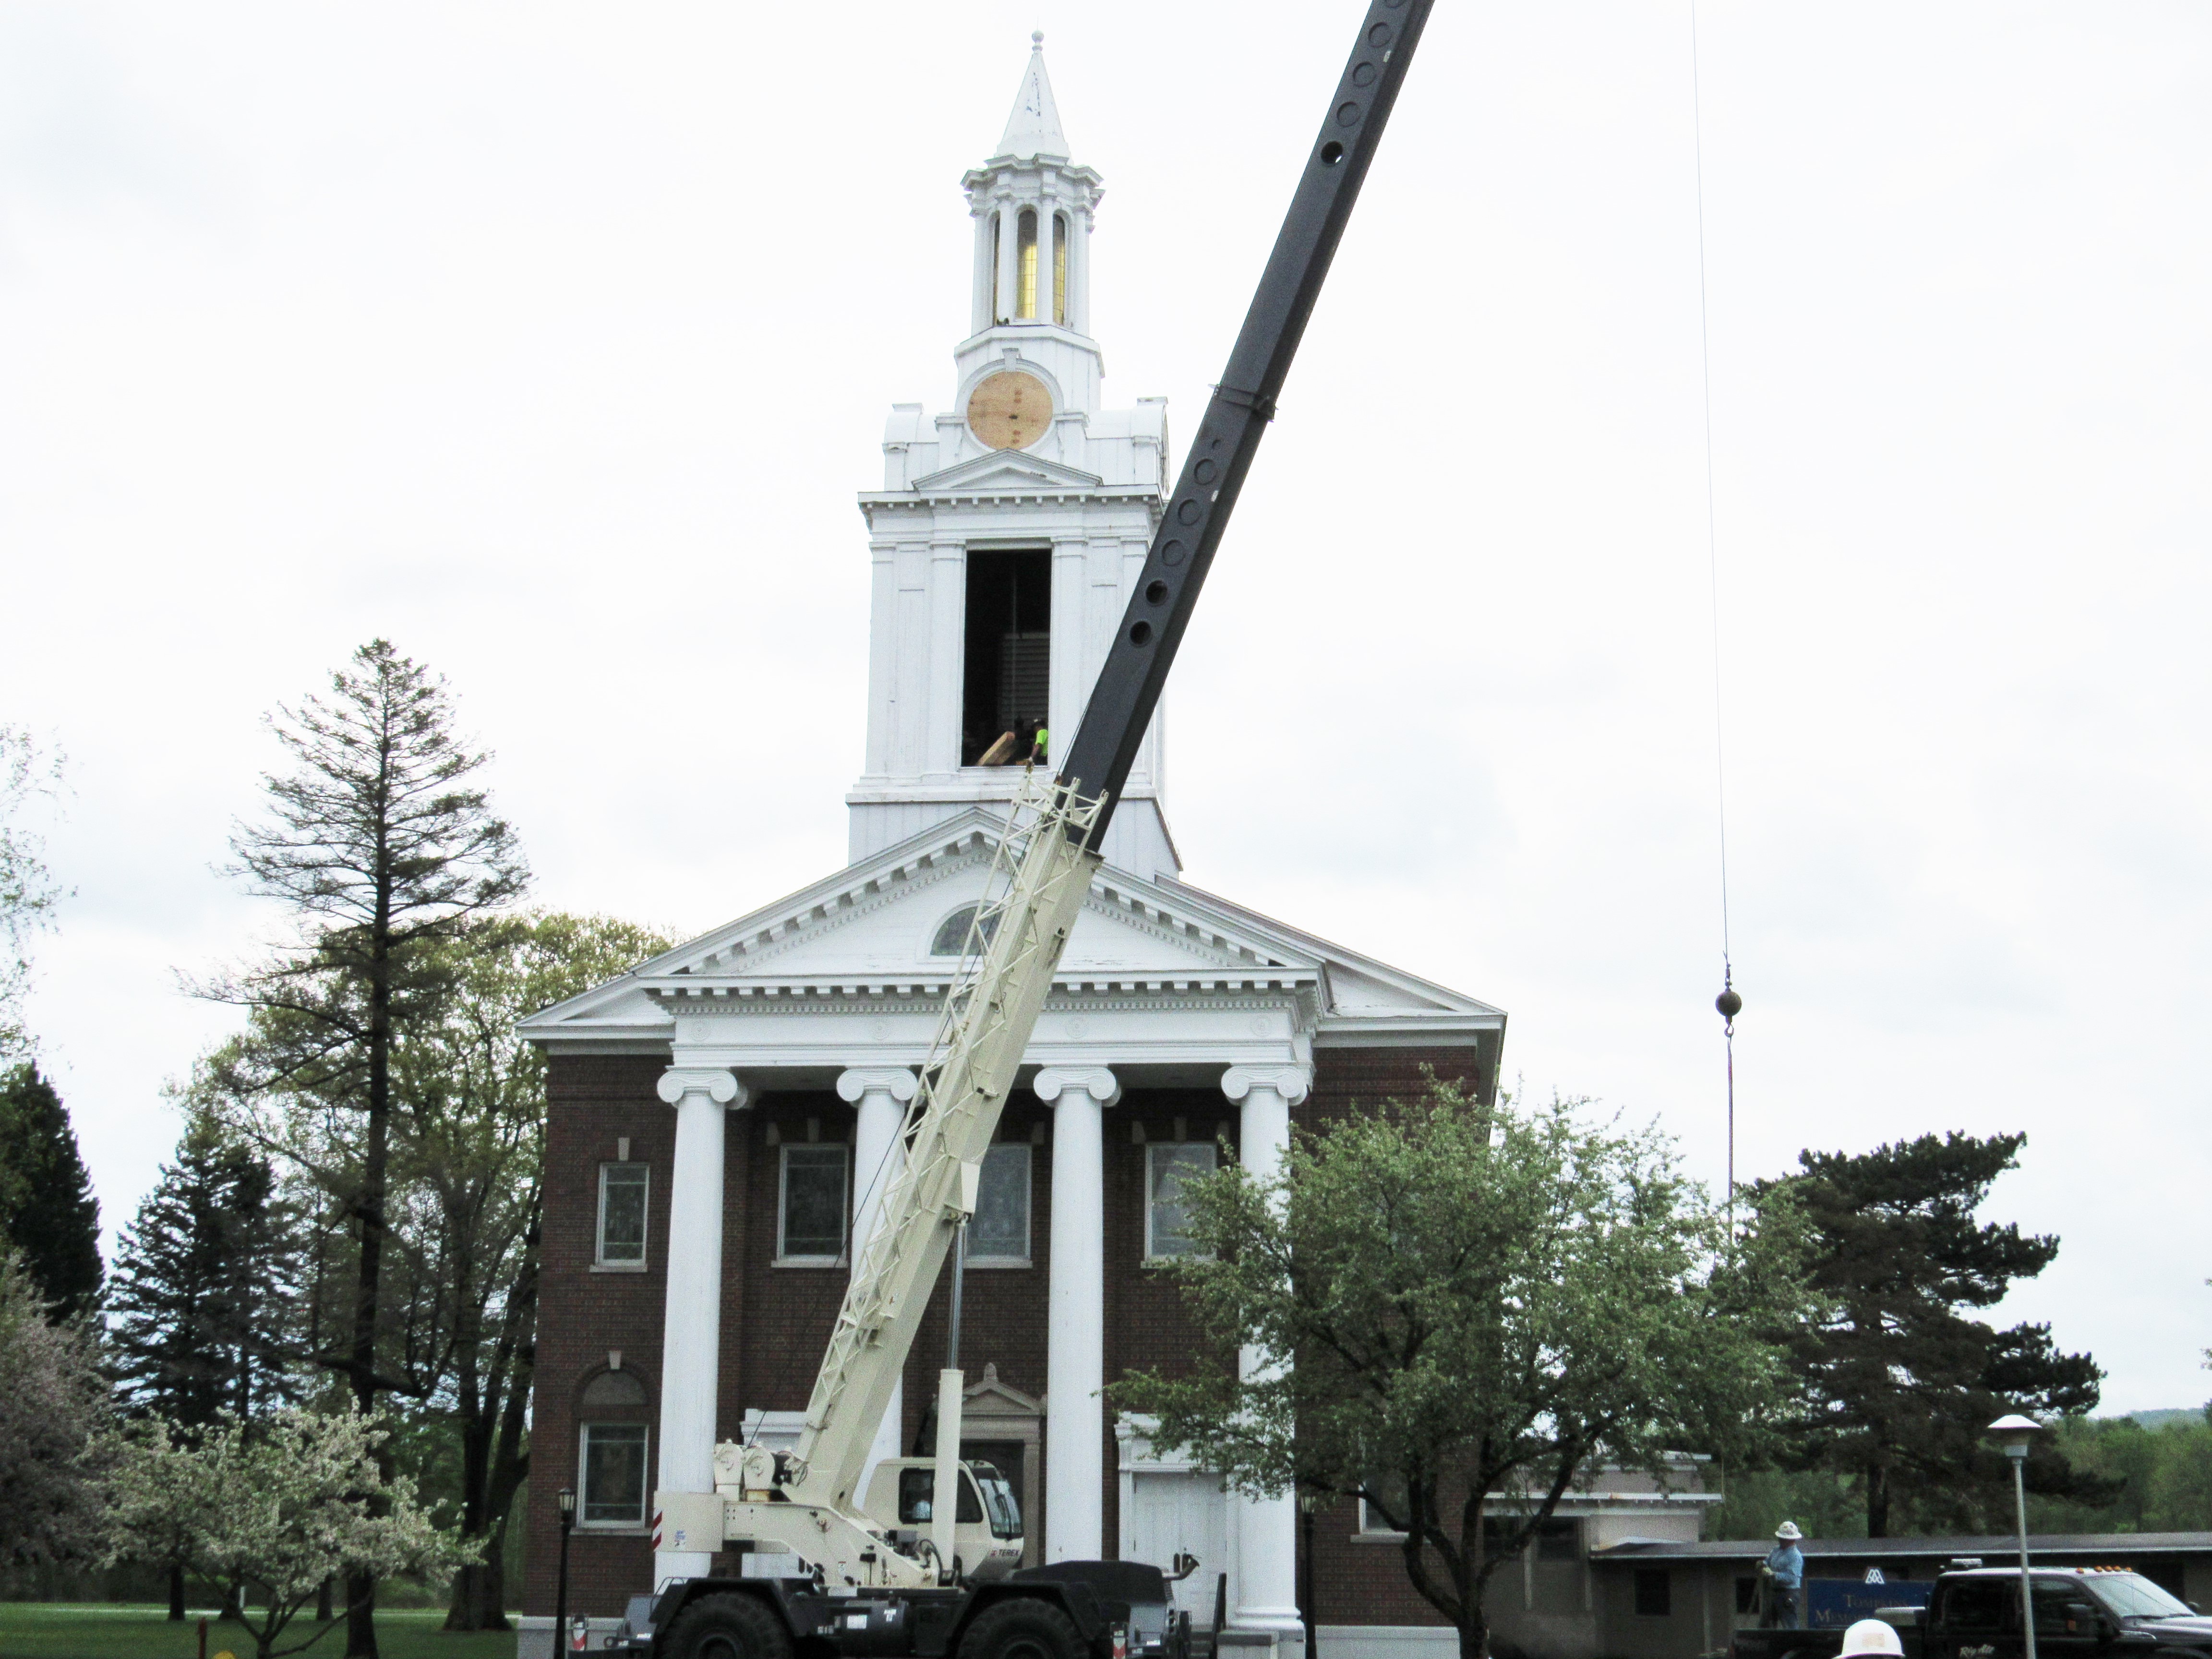 Removal of old Steeple at Tompkins Chapel